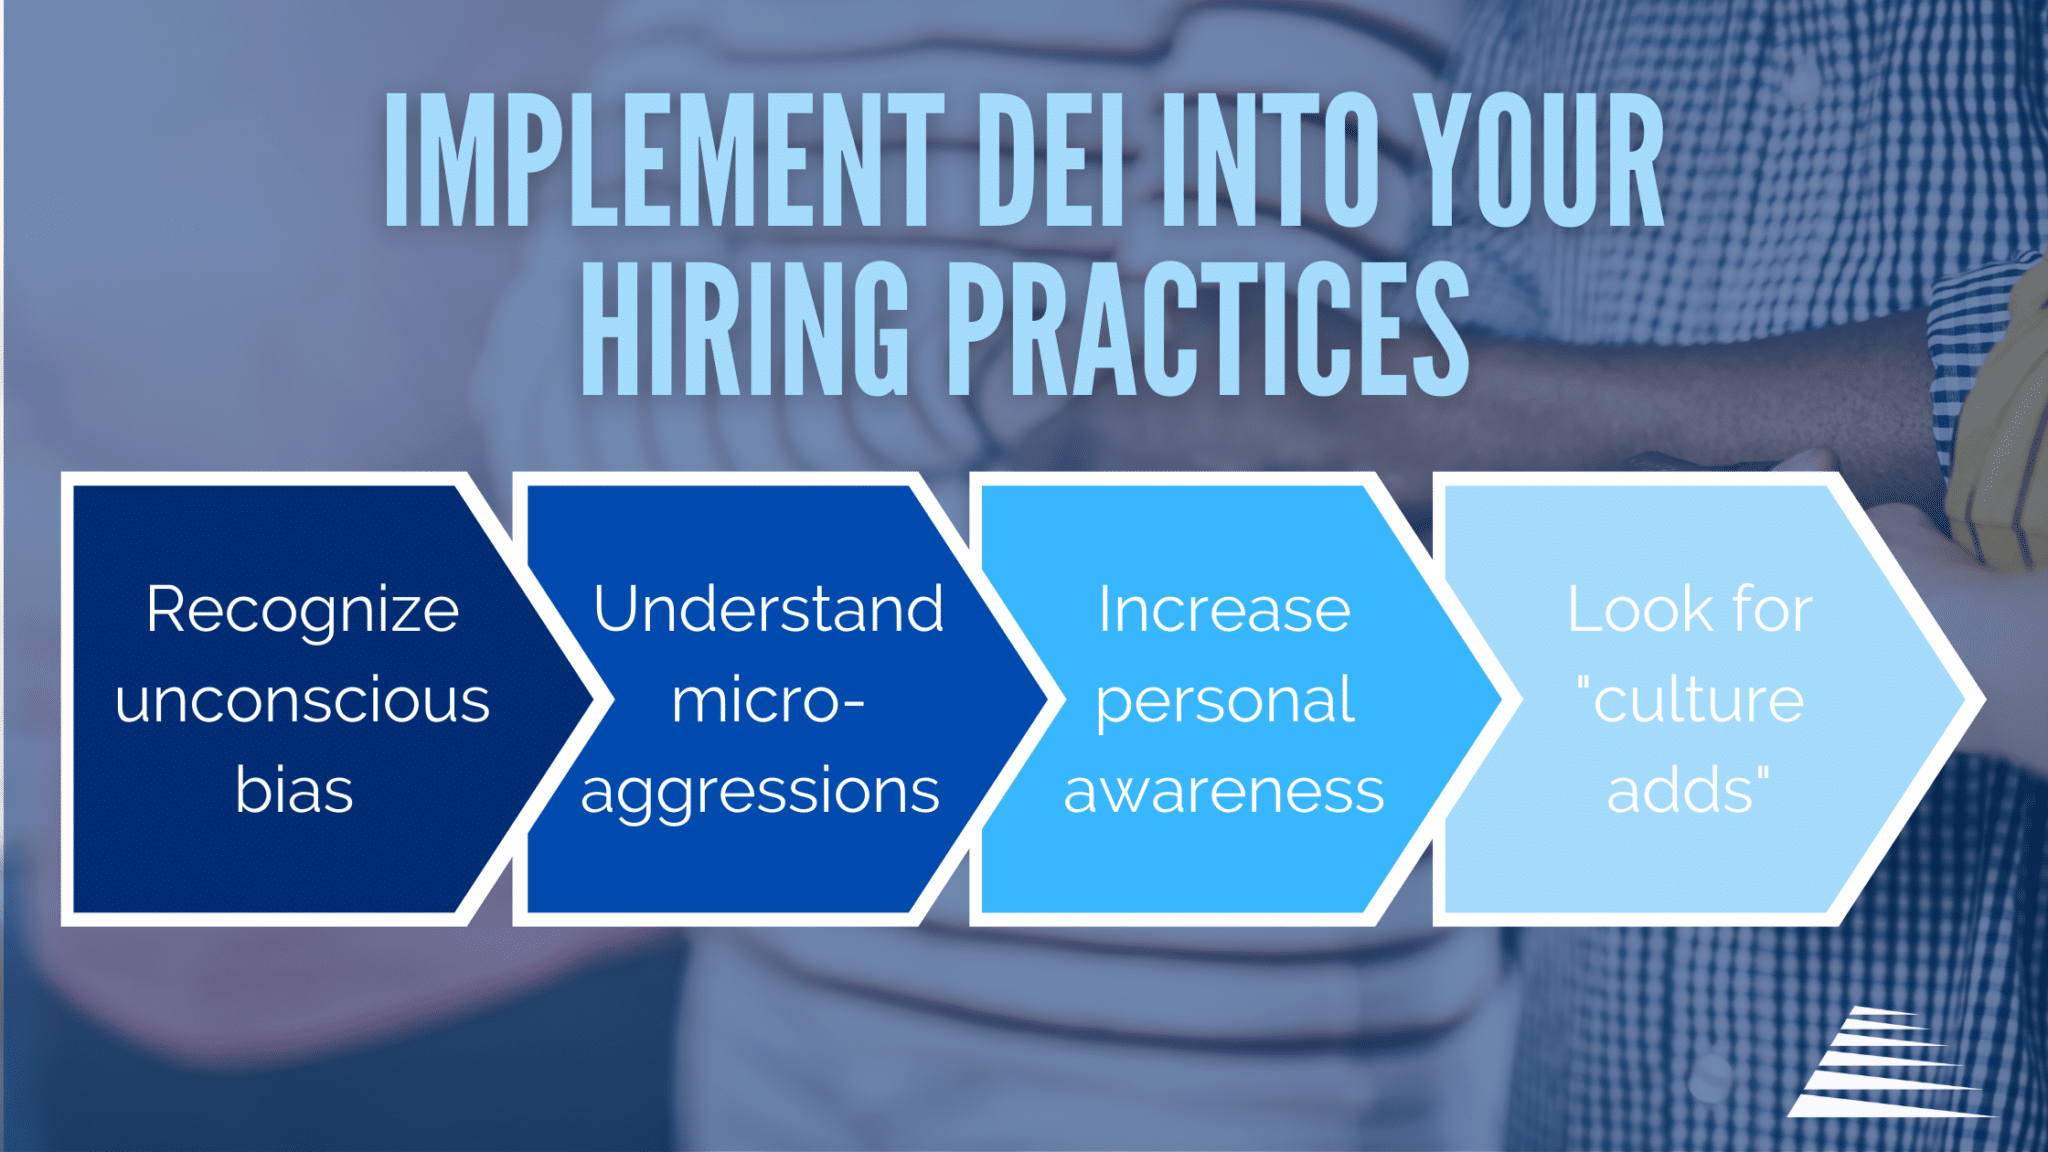 Graphic showing a flow chart with ways to implement DEI into your hiring practices